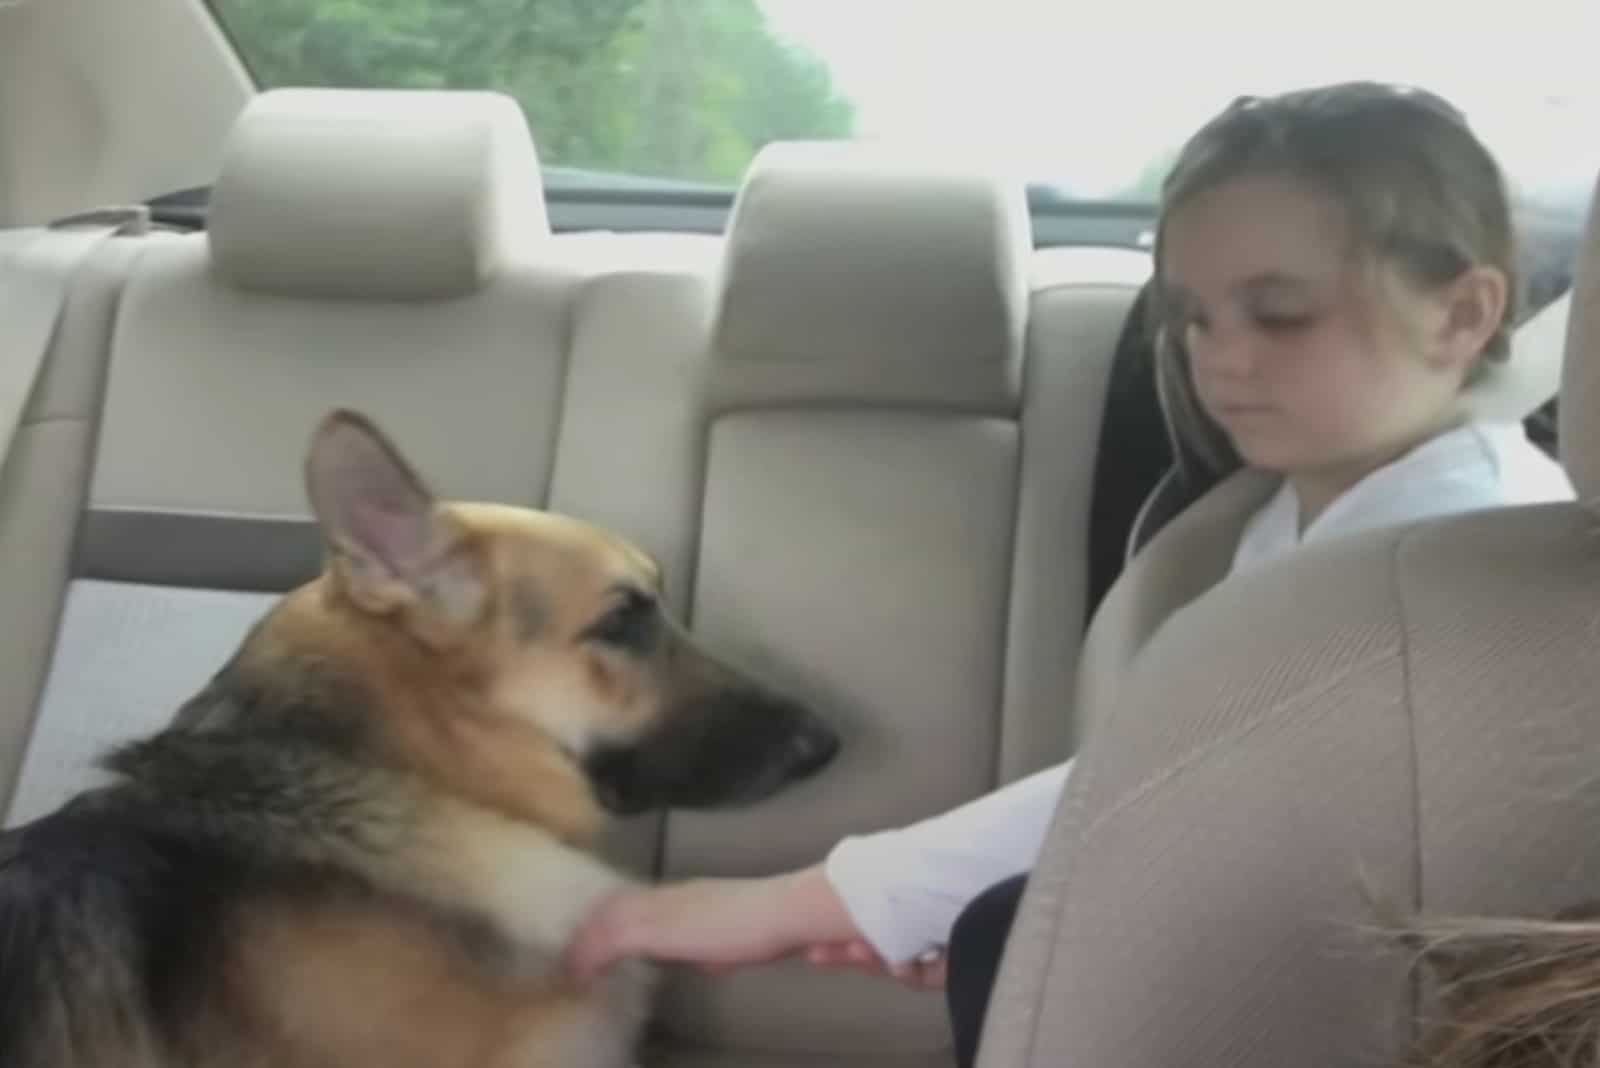 Haus the GSD and the girl together in the car